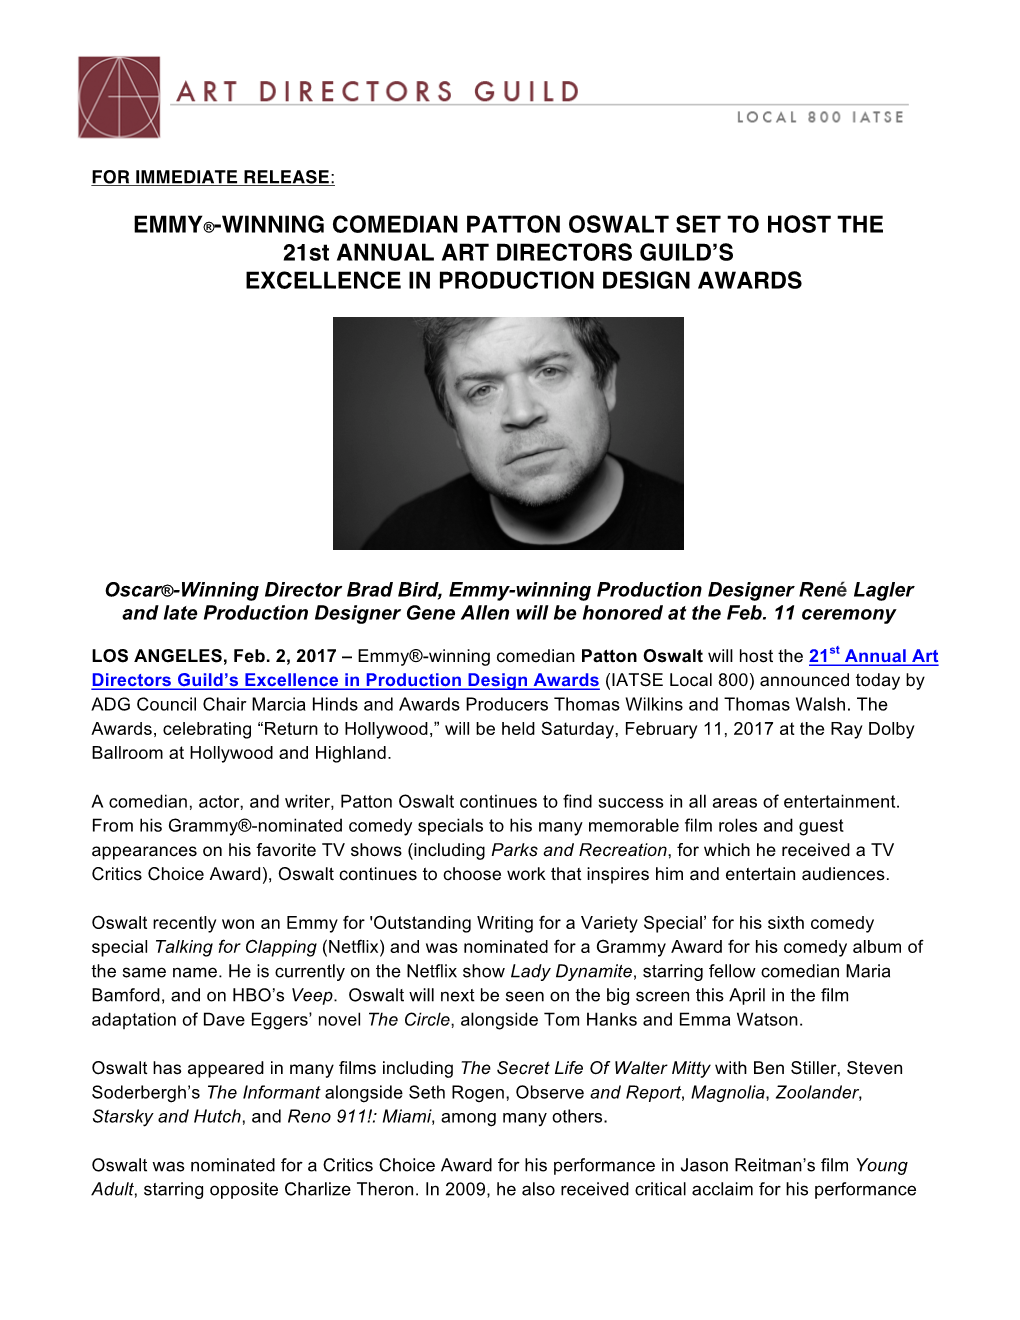 EMMY®-WINNING COMEDIAN PATTON OSWALT SET to HOST the 21St ANNUAL ART DIRECTORS GUILD’S EXCELLENCE in PRODUCTION DESIGN AWARDS